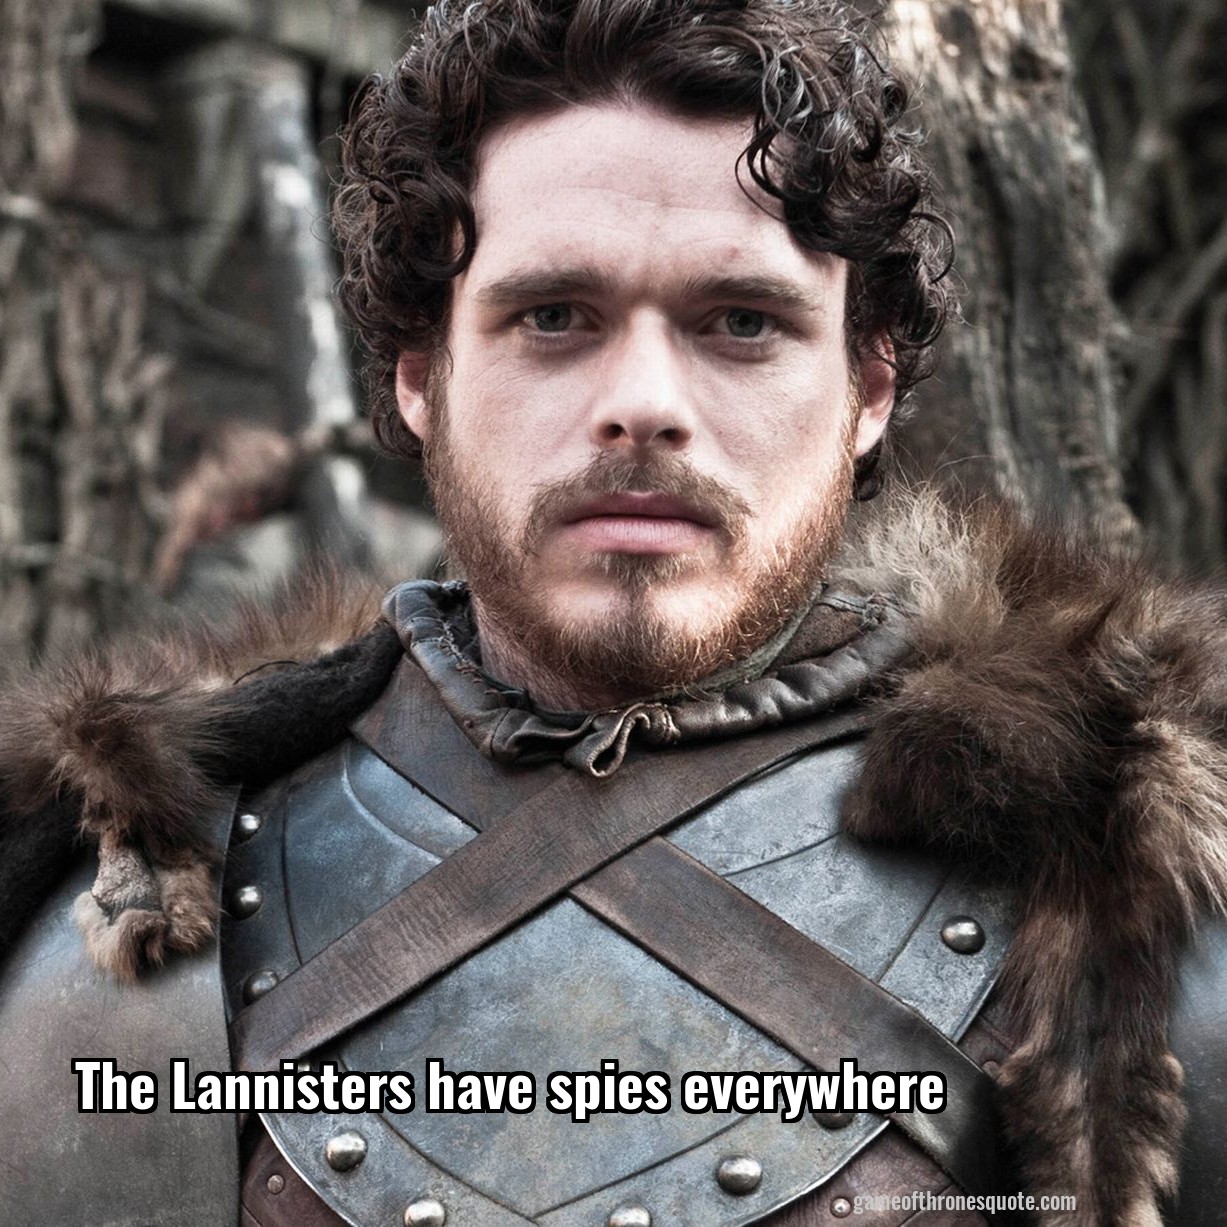 The Lannisters have spies everywhere